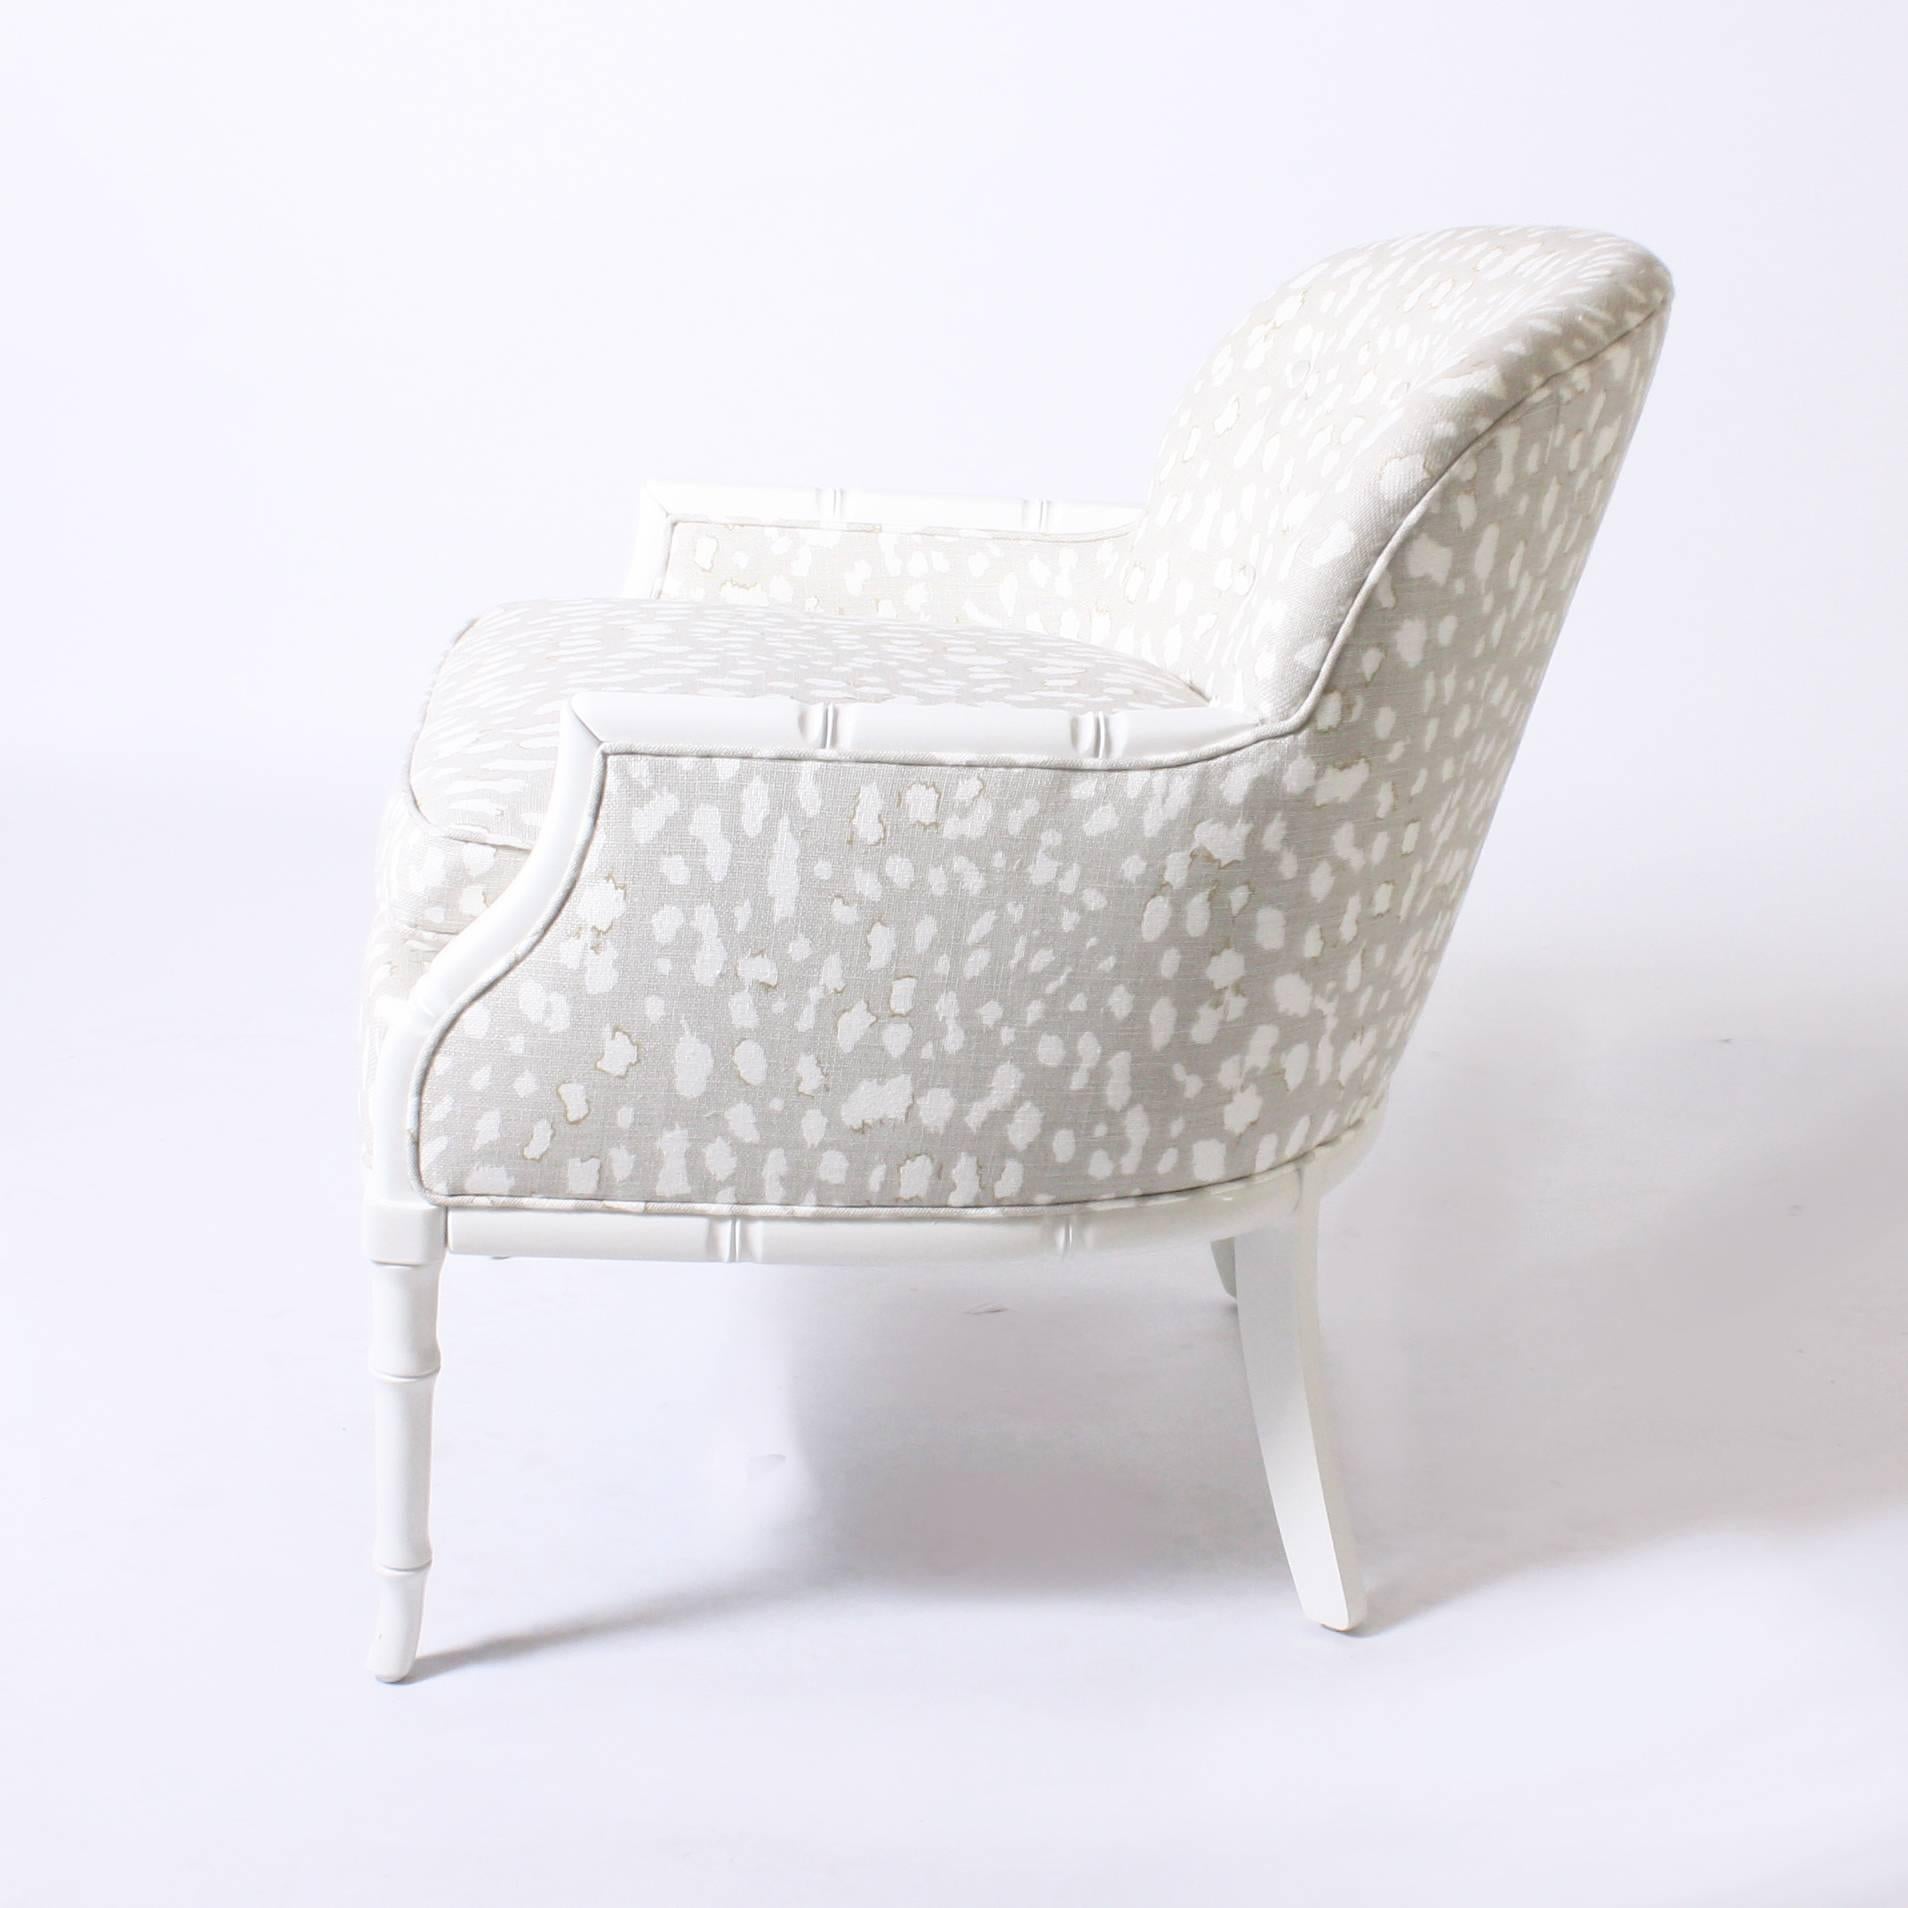 Upholstery Faux Bamboo Club Chair for Kravet fabric, circa 1960